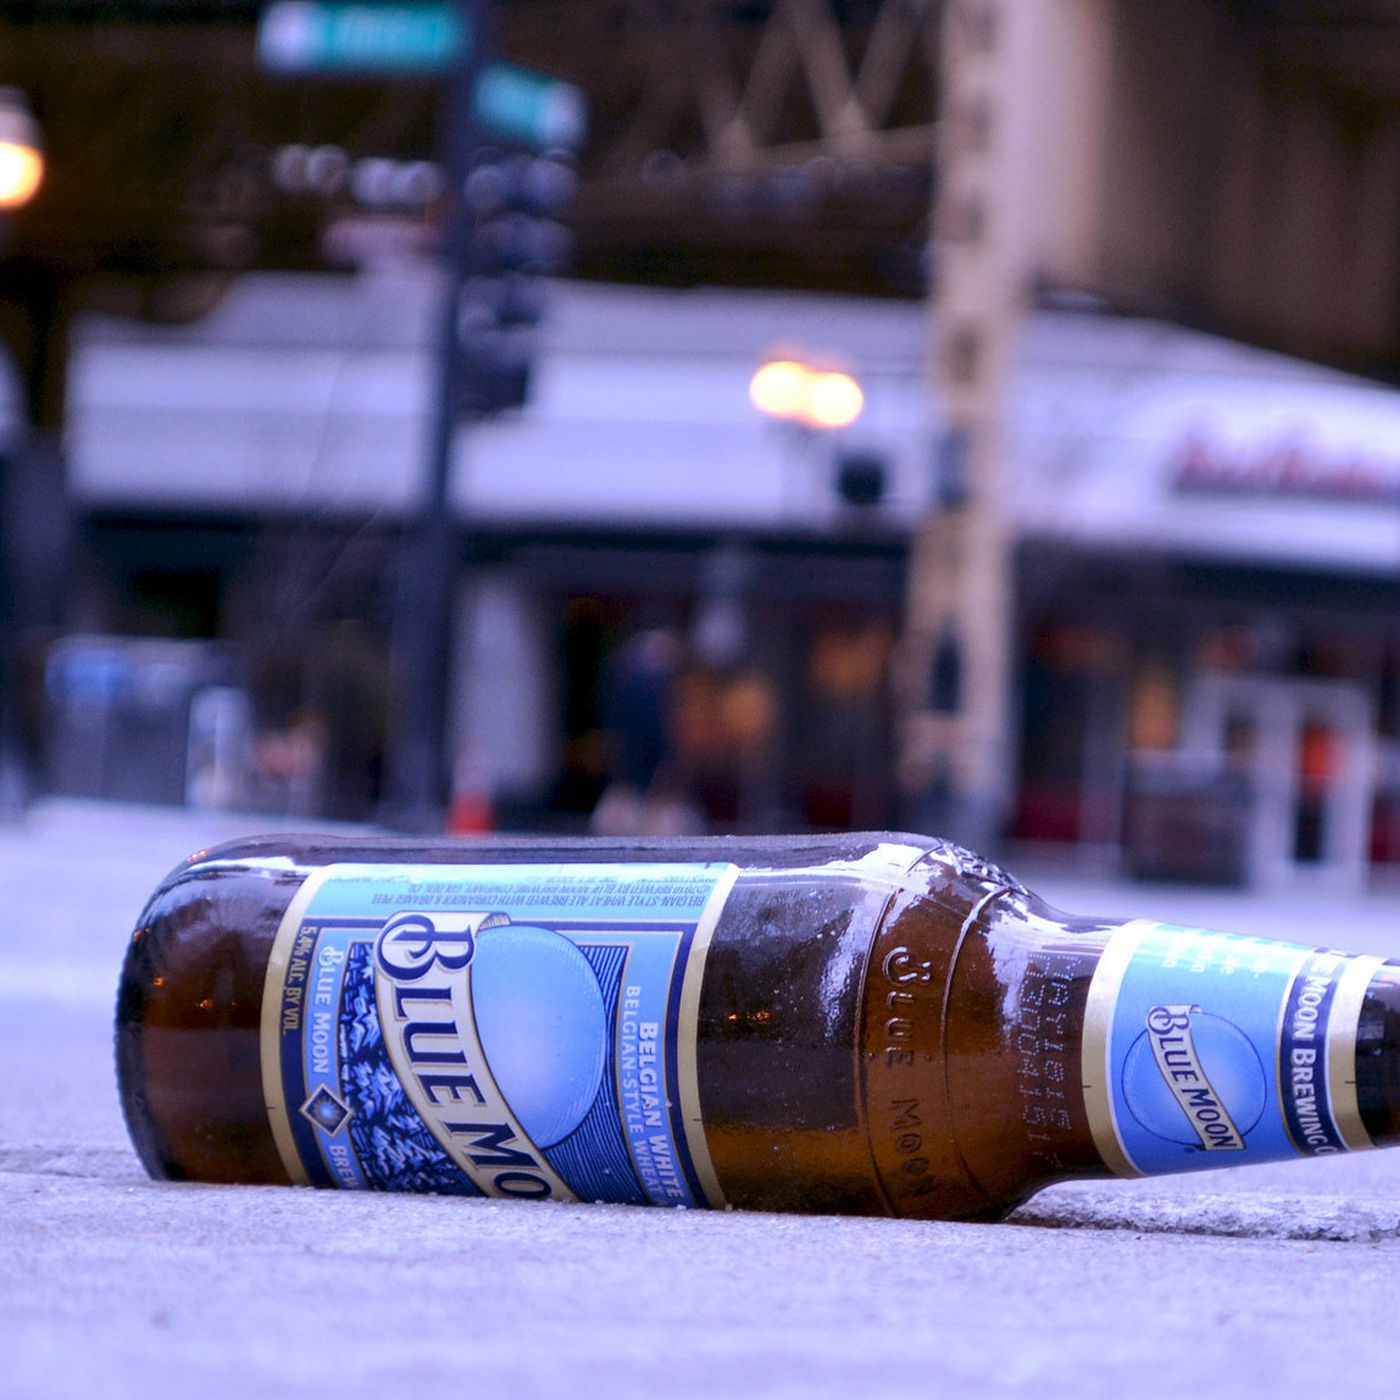 Marketing Blue Moon as a Craft Beer Is Perfectly Legal, Says Court